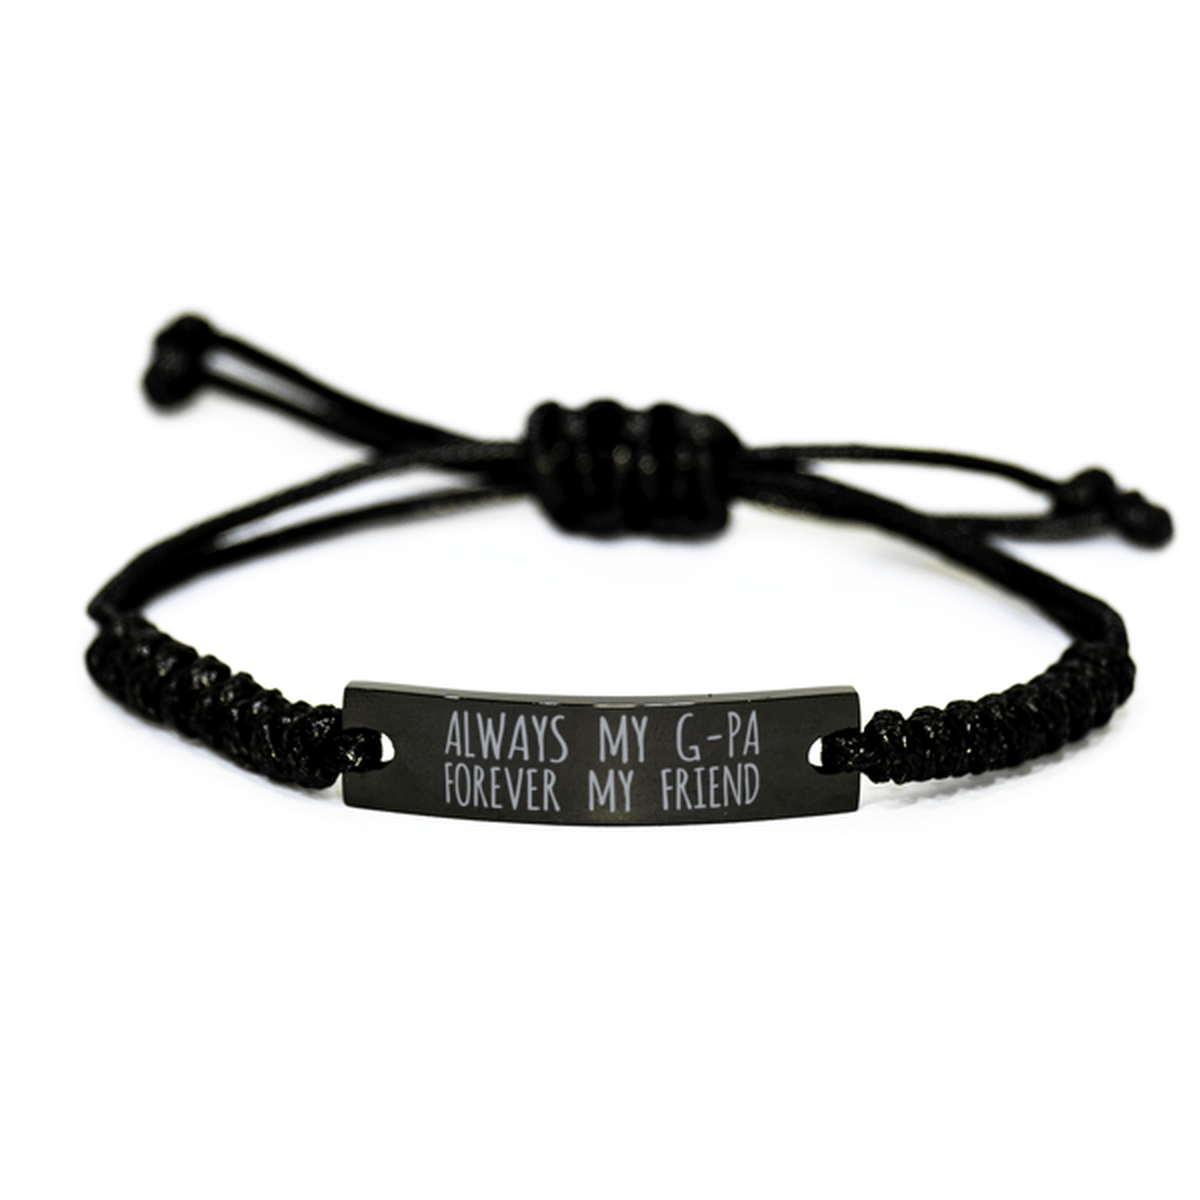 Inspirational G Pa Black Rope Bracelet, Always My G Pa Forever My Friend, Best Birthday Gifts For Family